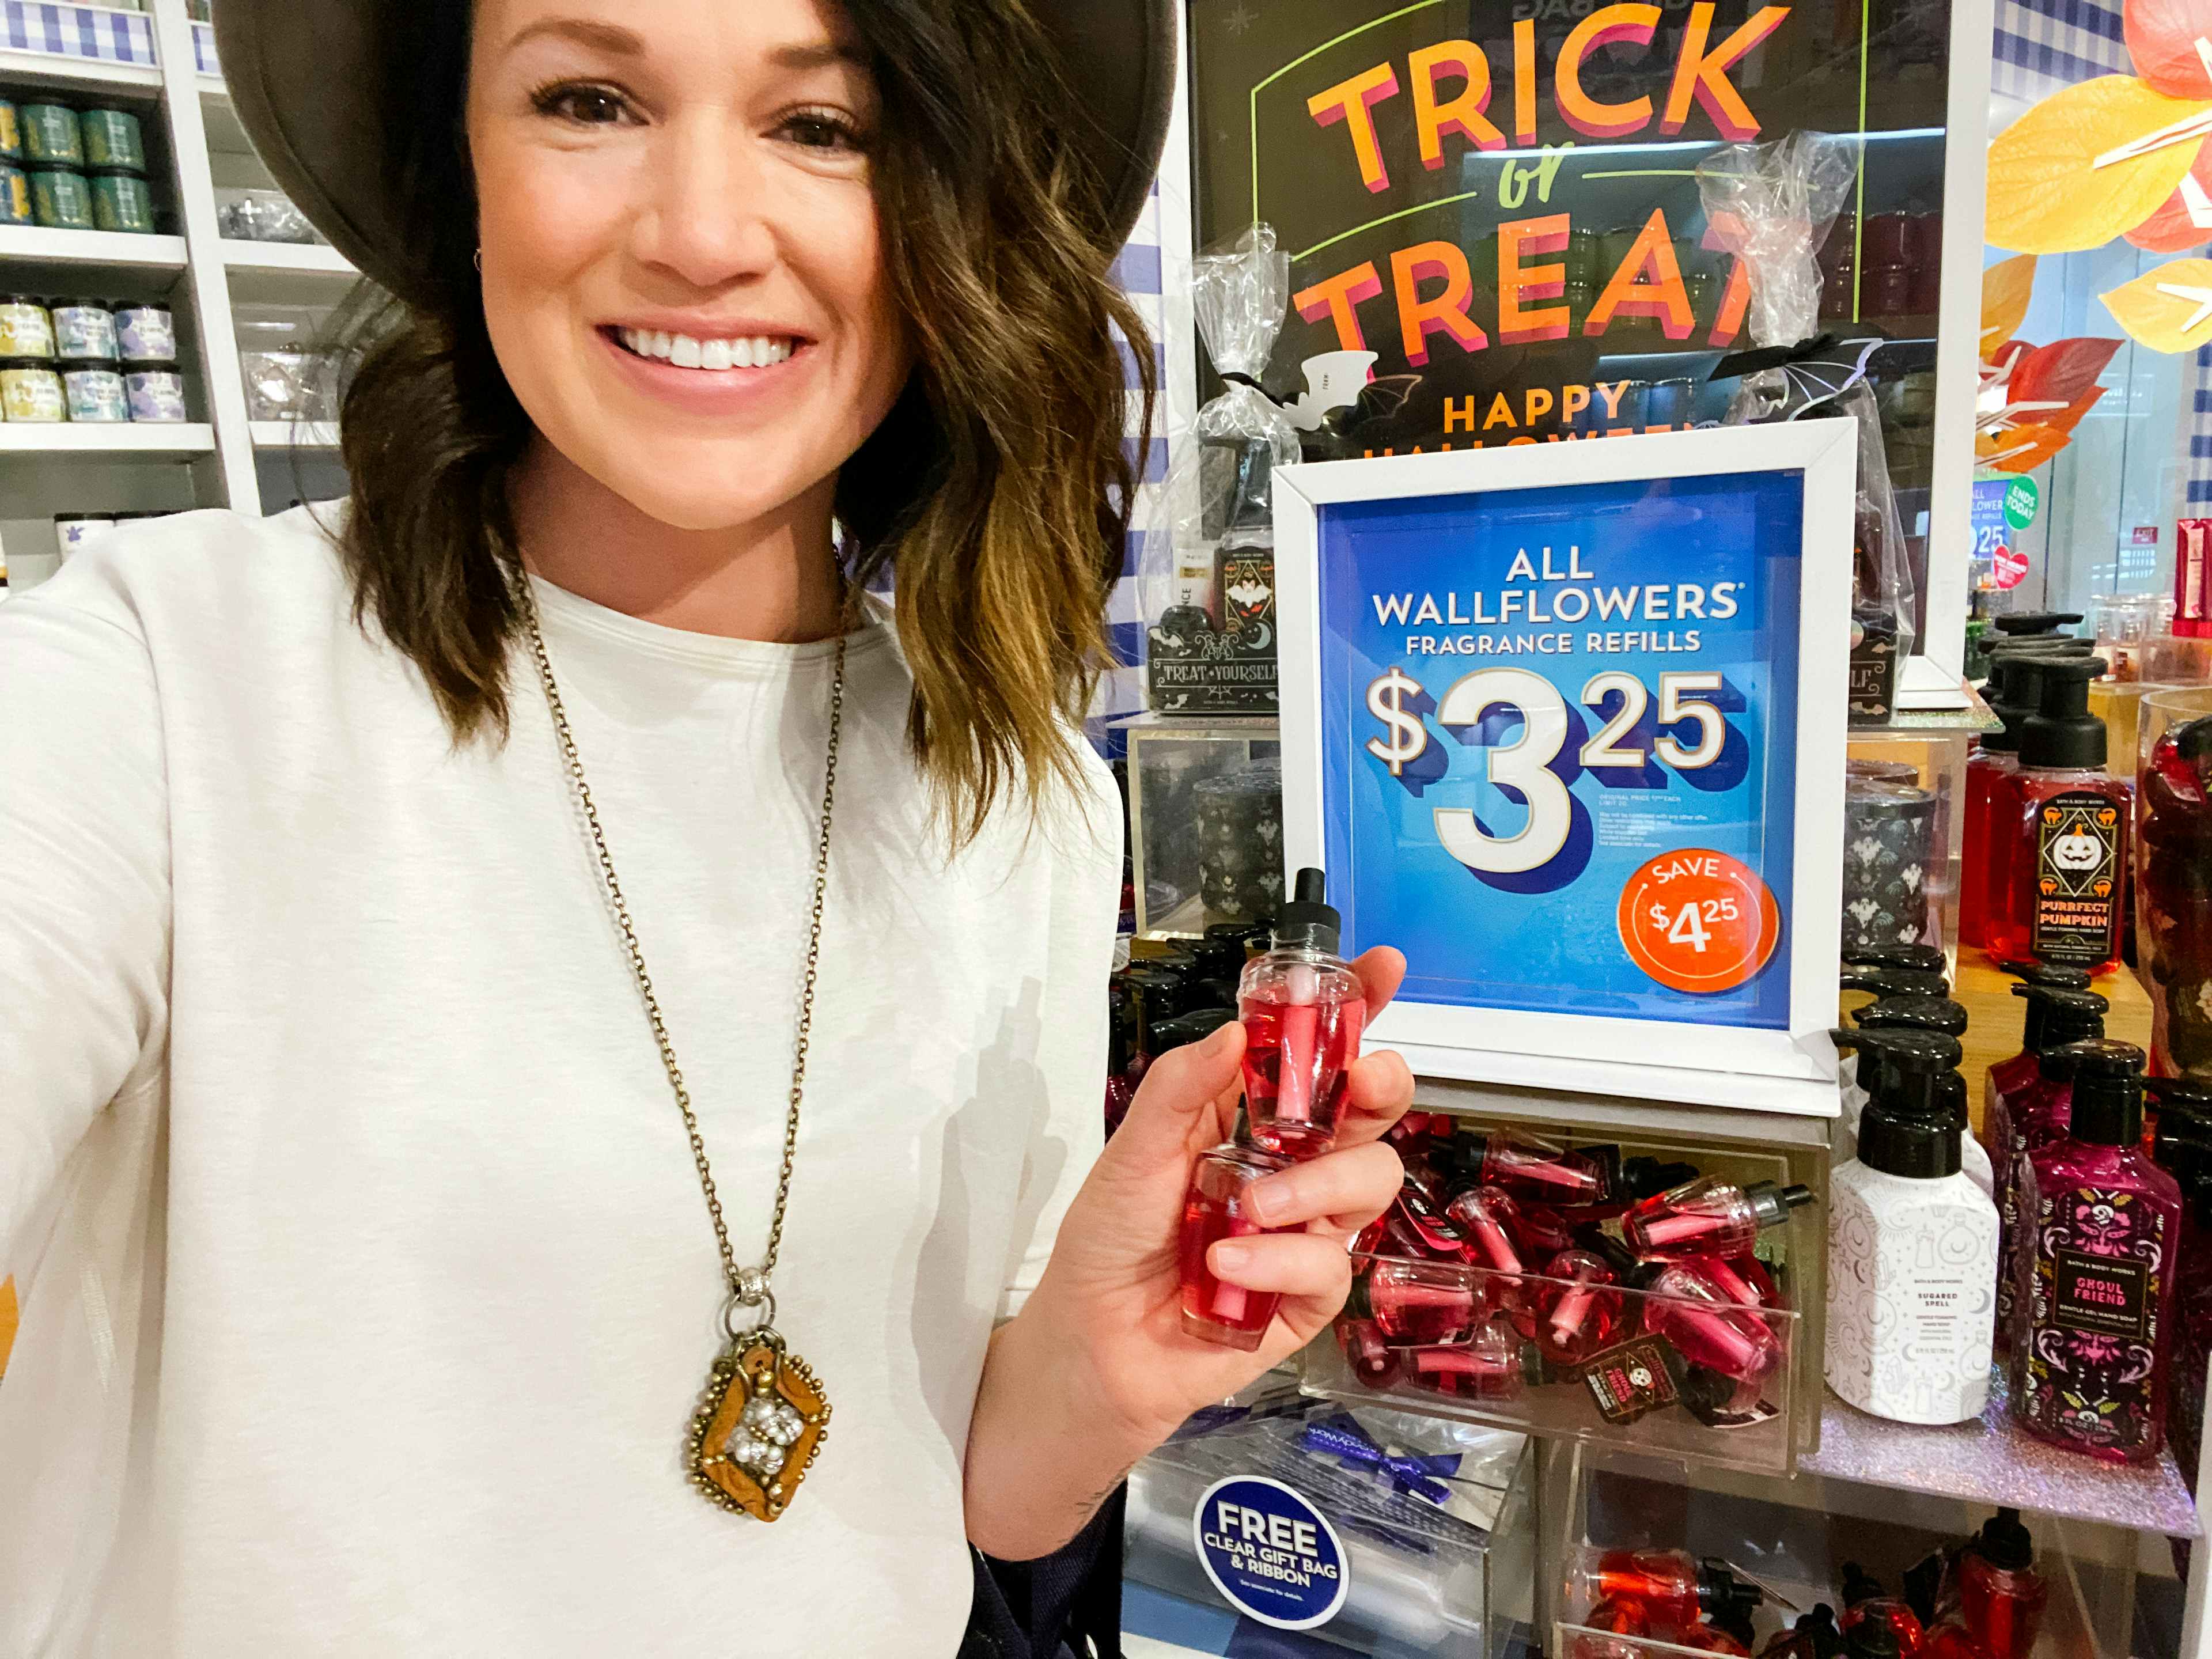 A woman smiling and holding up a Bath & Body Works wallflower refill in front of a sign that reads, "All wallflowers fragrance refills $3...